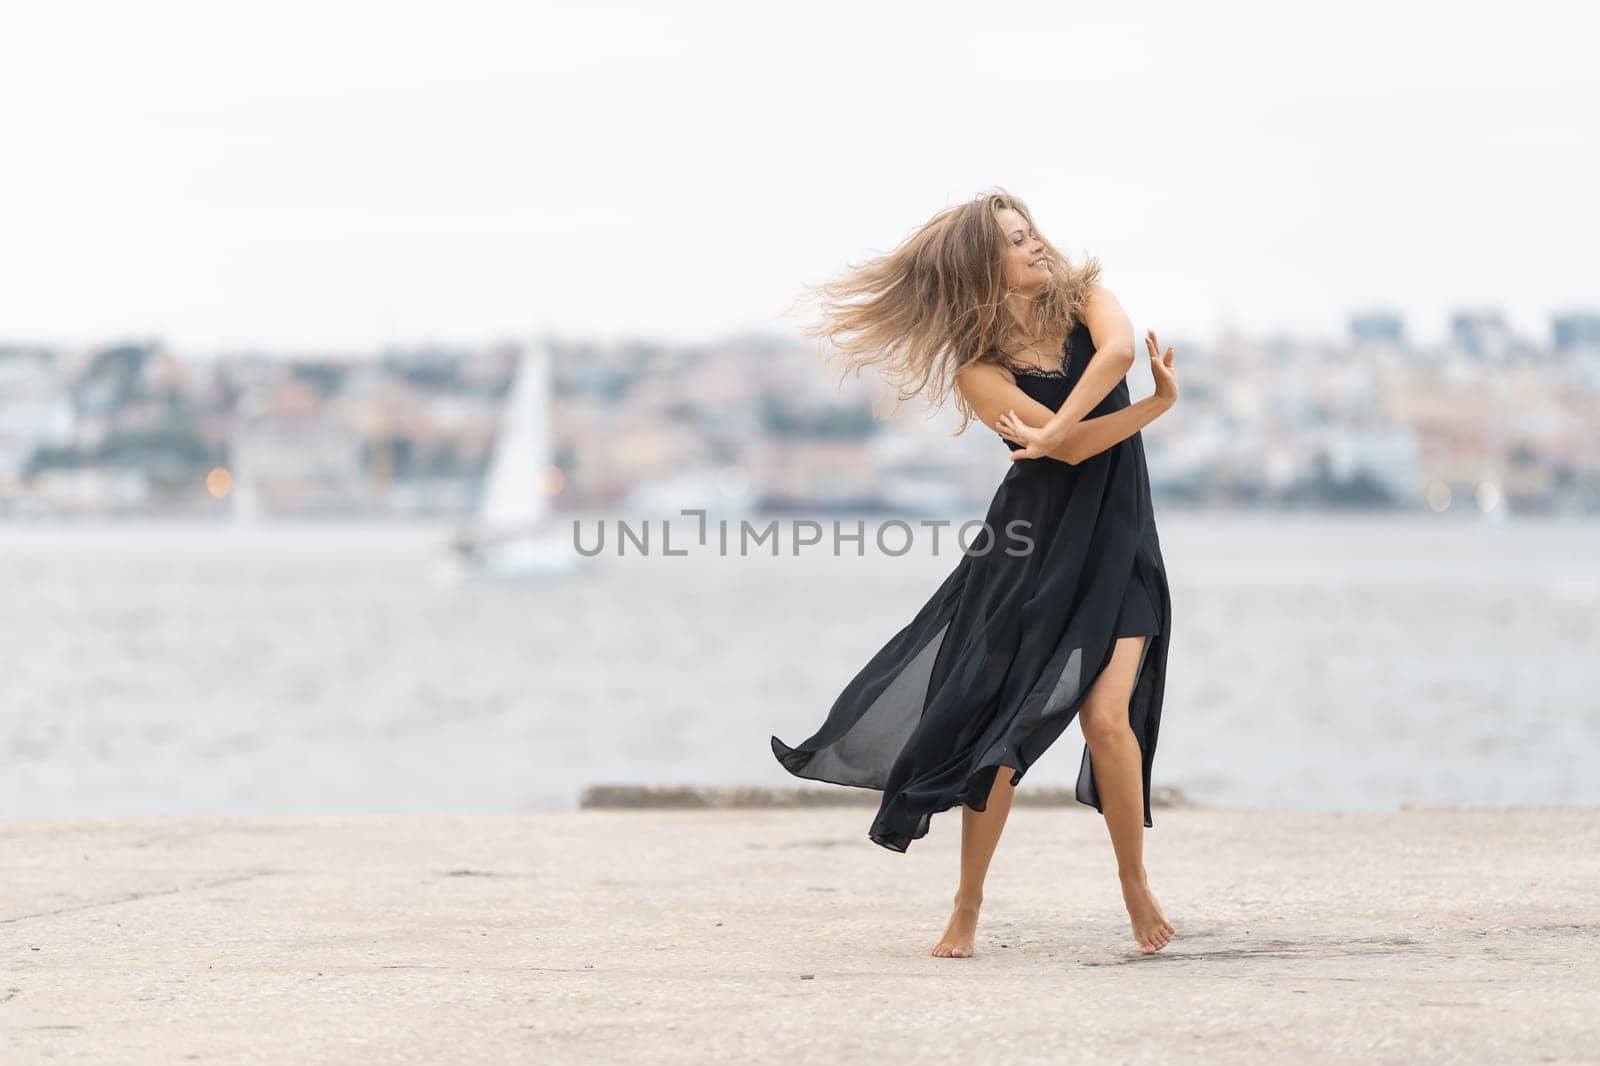 An adult smiling woman in black dress dancing on the pier in cloudy weather. Mid shot